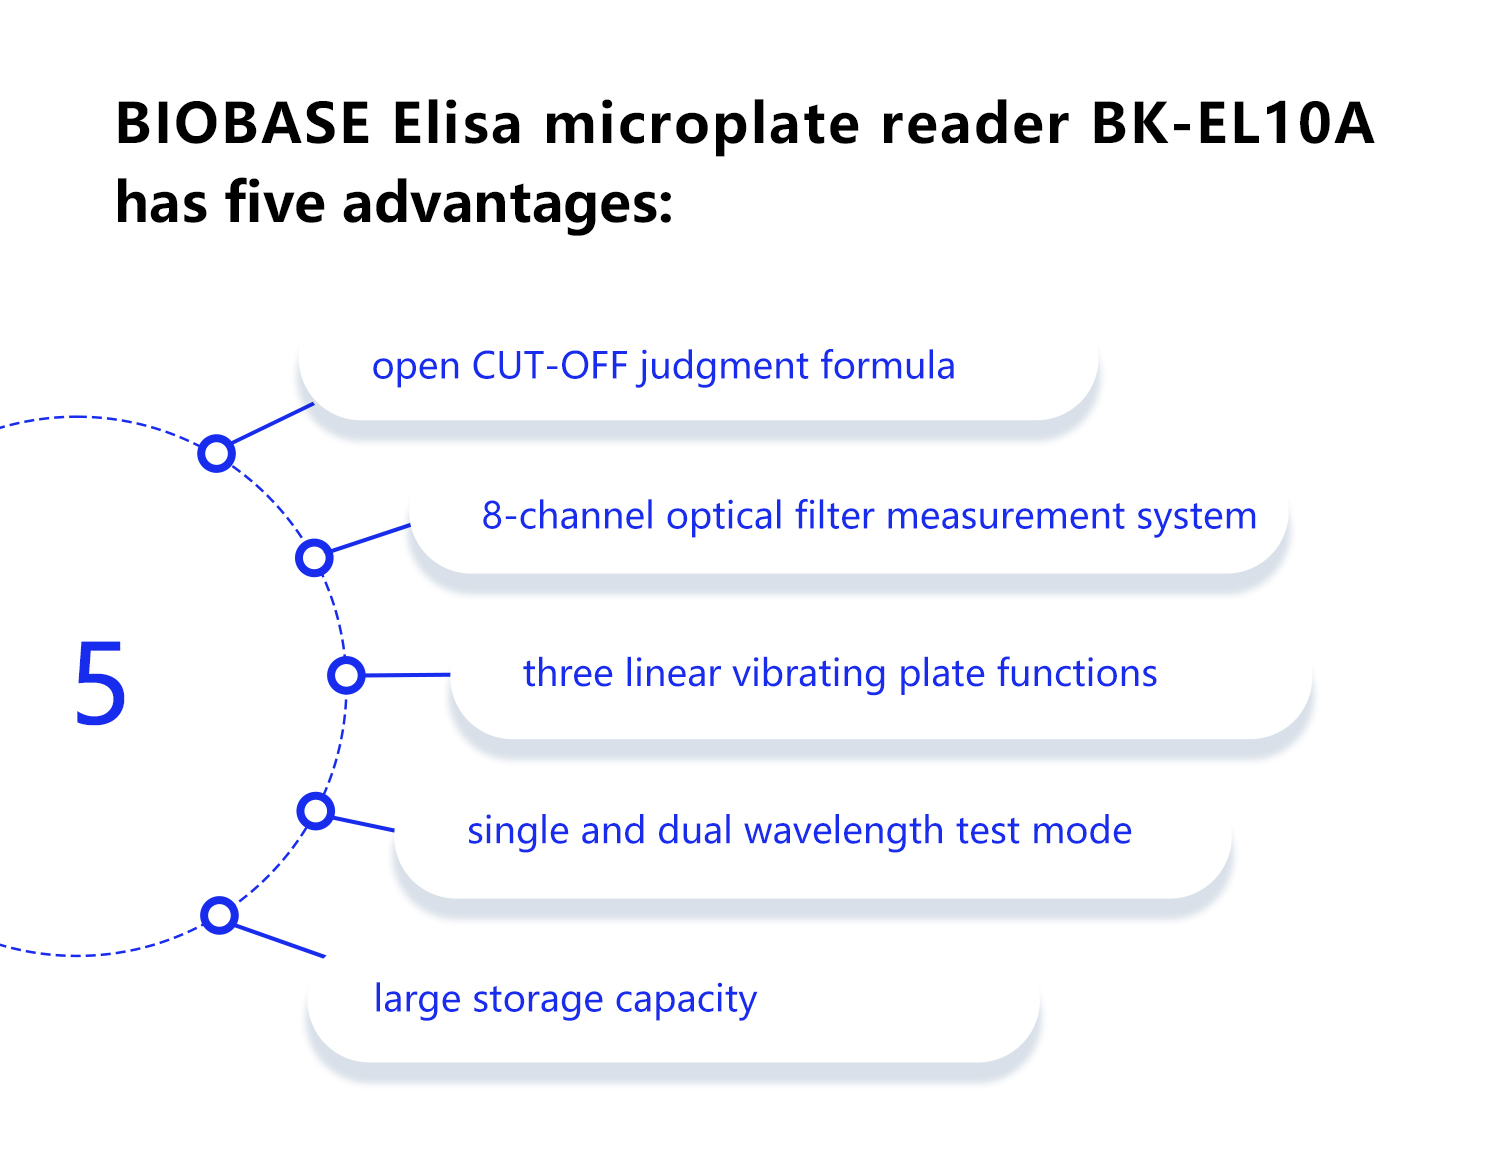 An important "membre" of BIOASE biochemical products - Elisa microplate reader